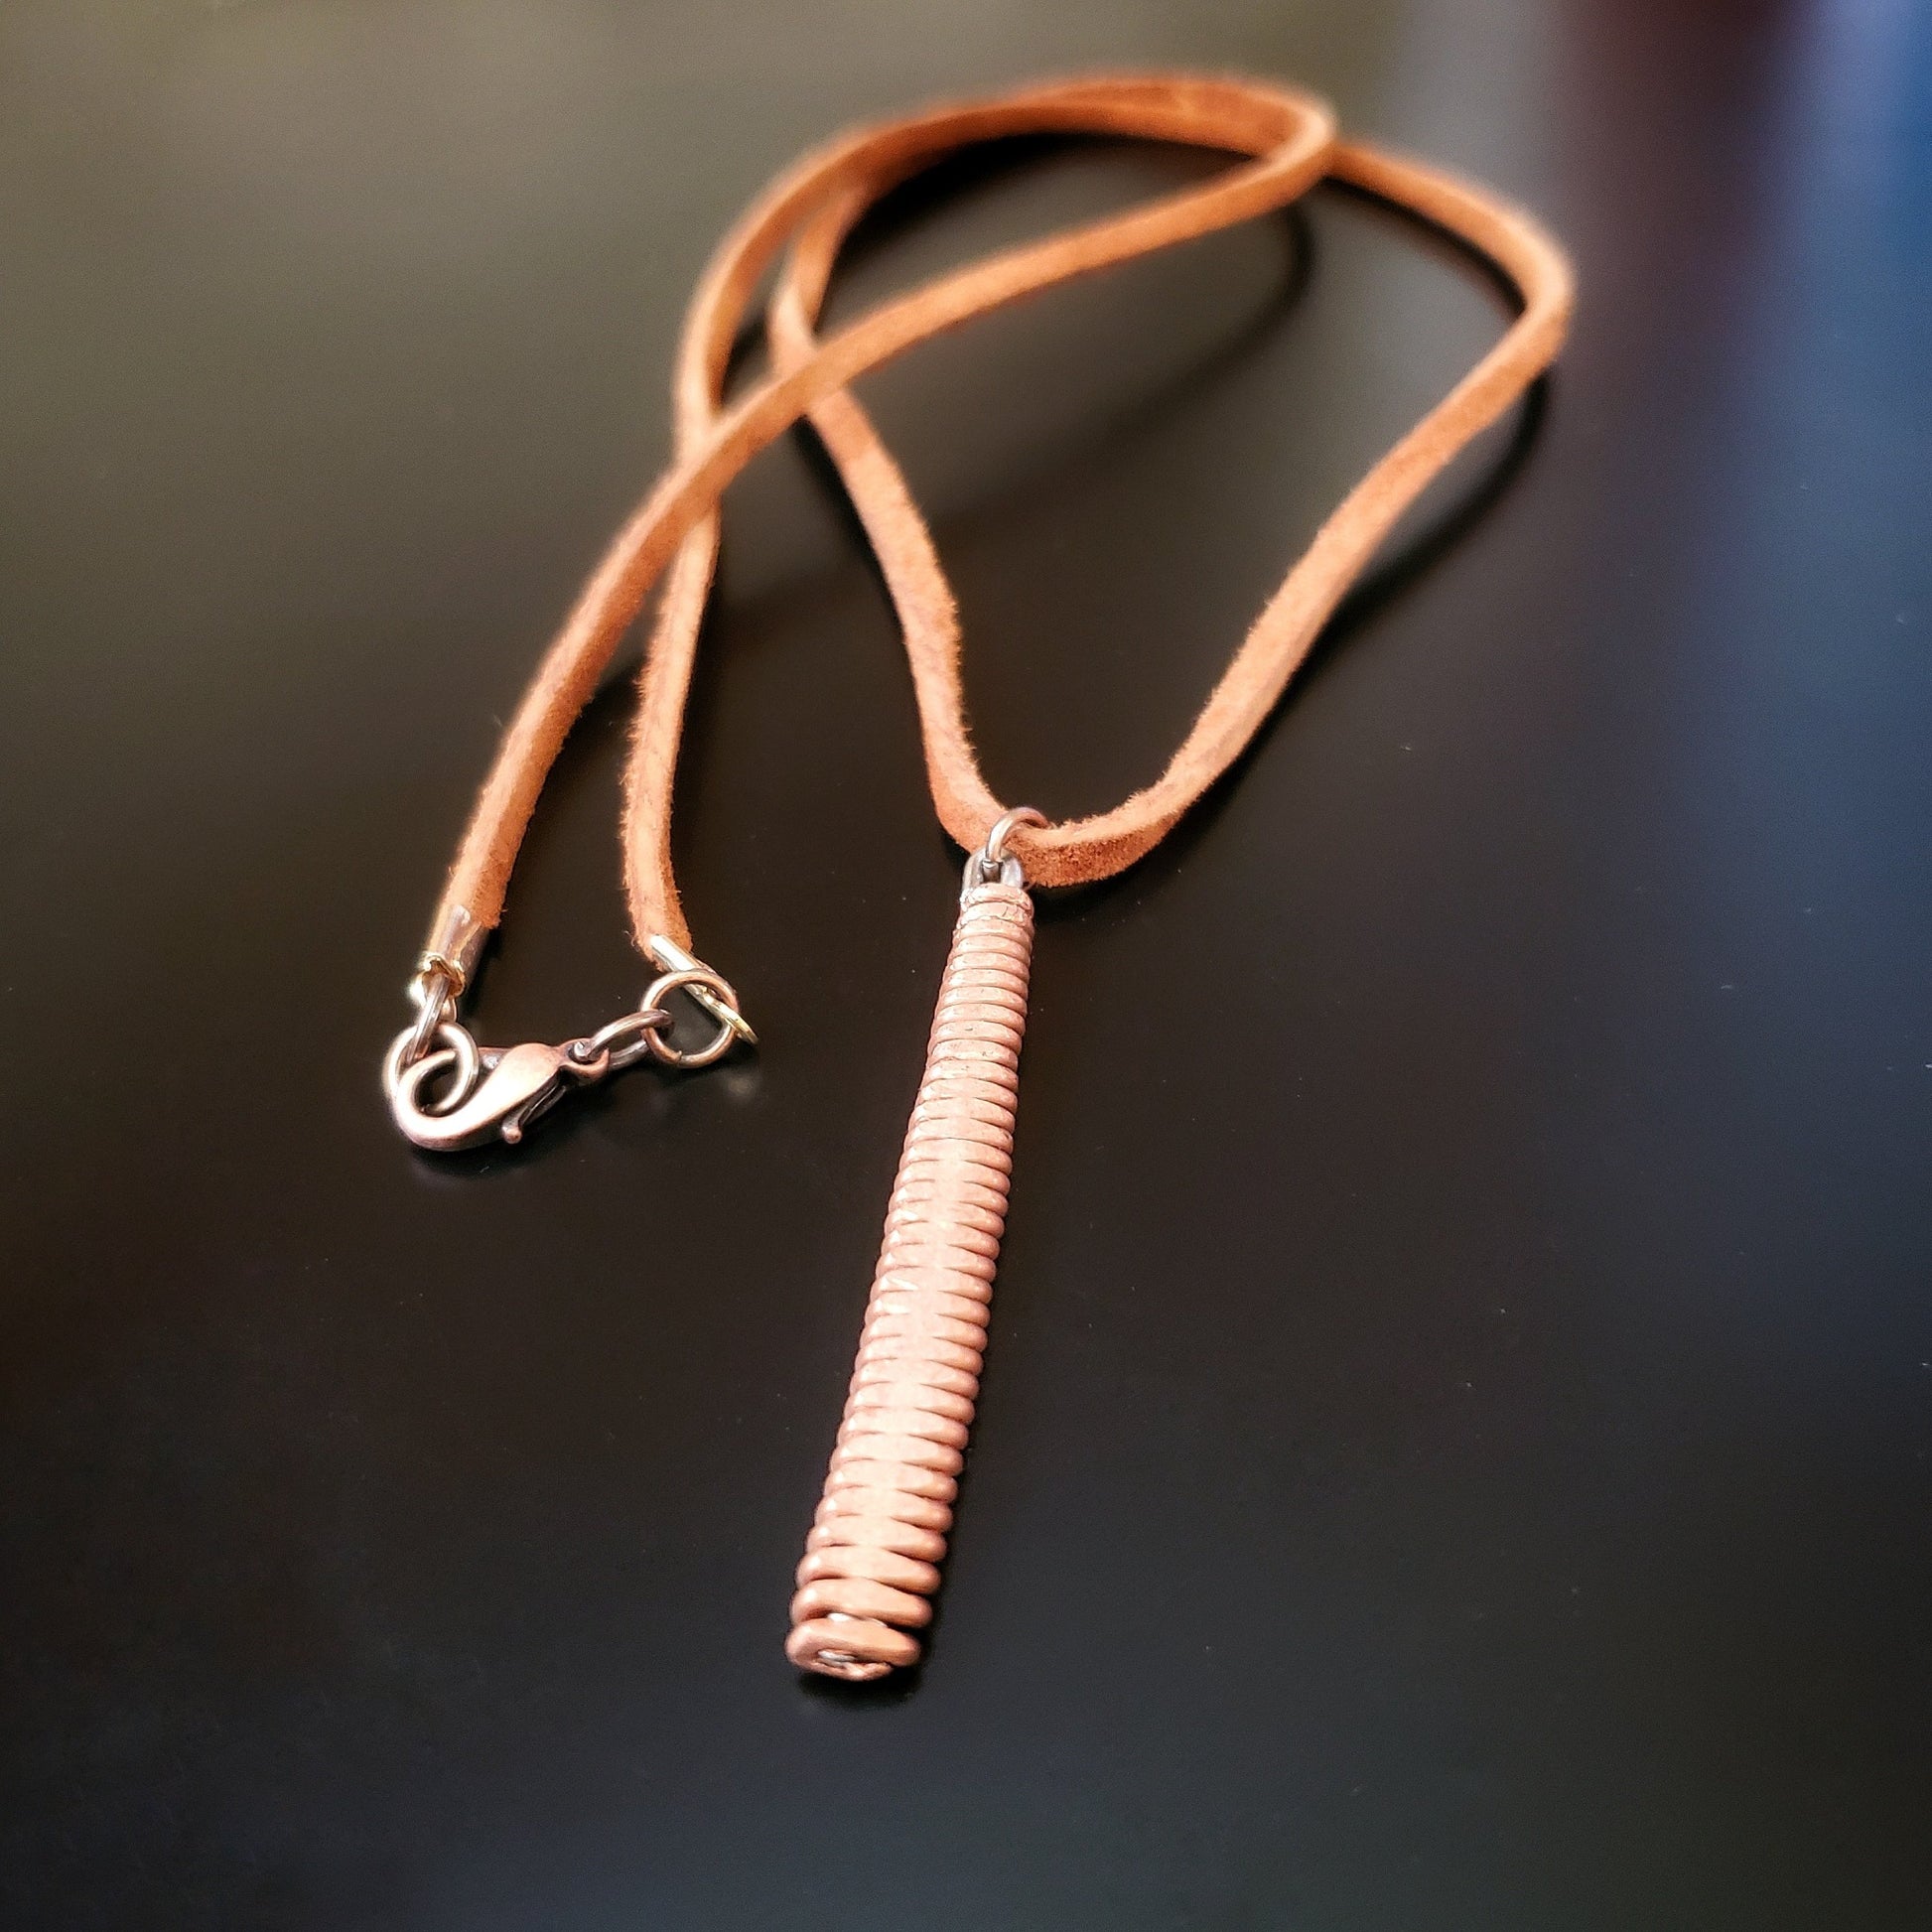 necklace made from a brown suede lanyard on which hangs a pendant made from a copper piano string hammered flat